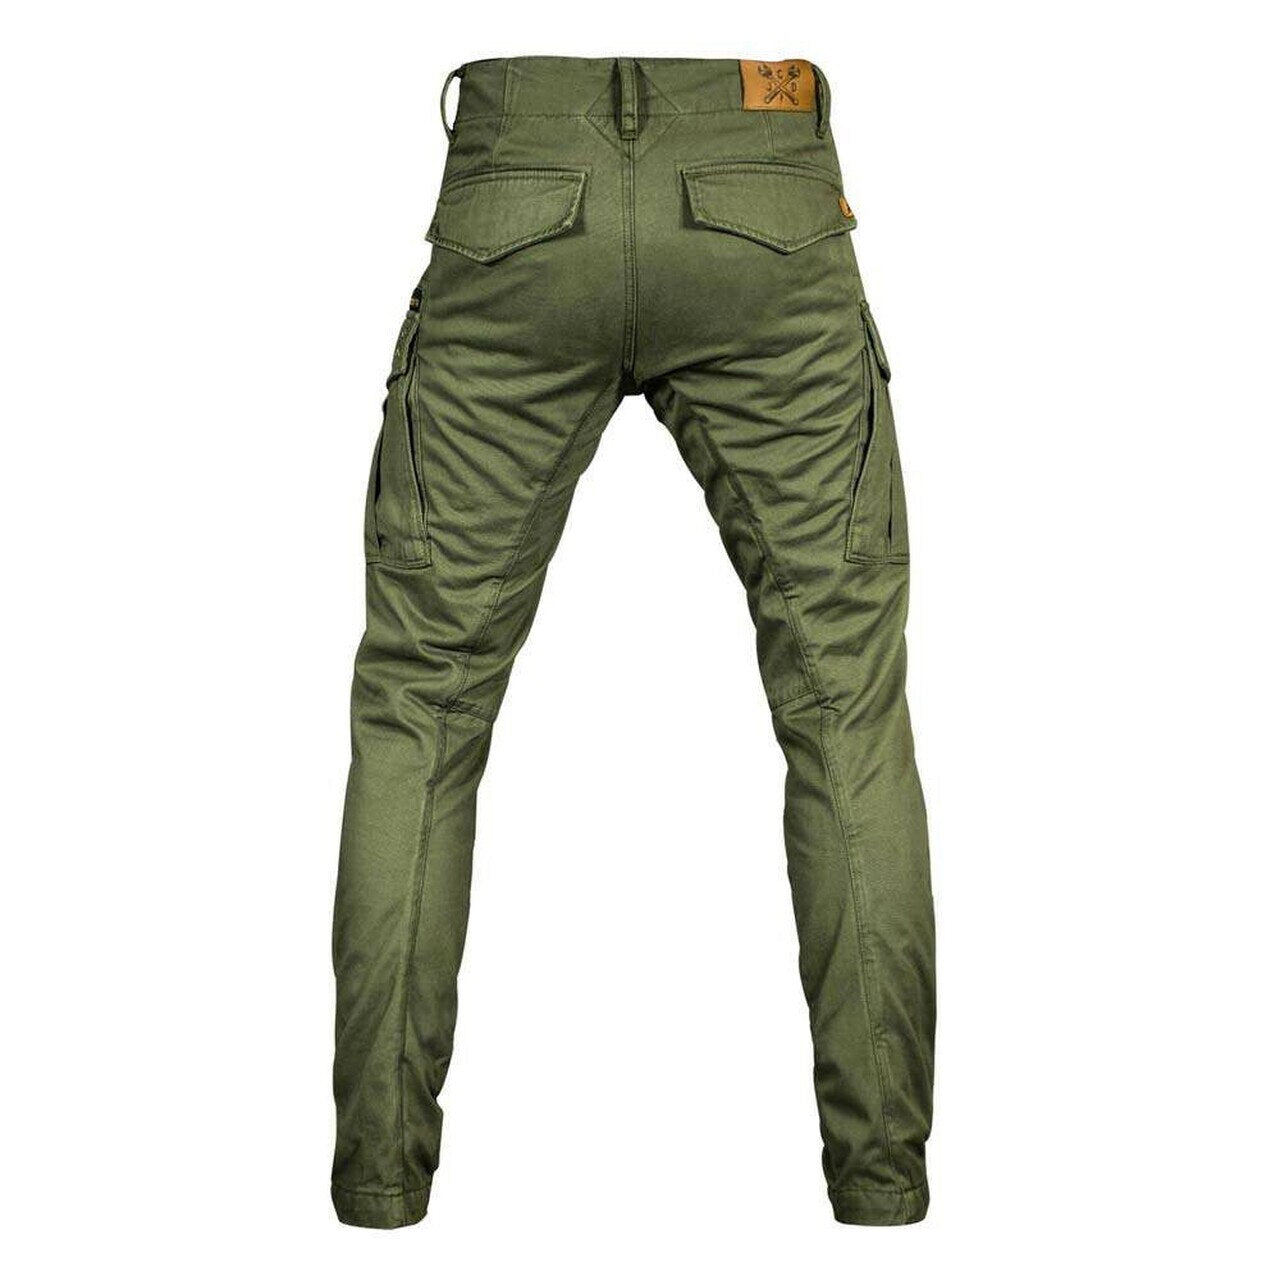 JohnDoe Cargo Pants in Olive colour, rear view